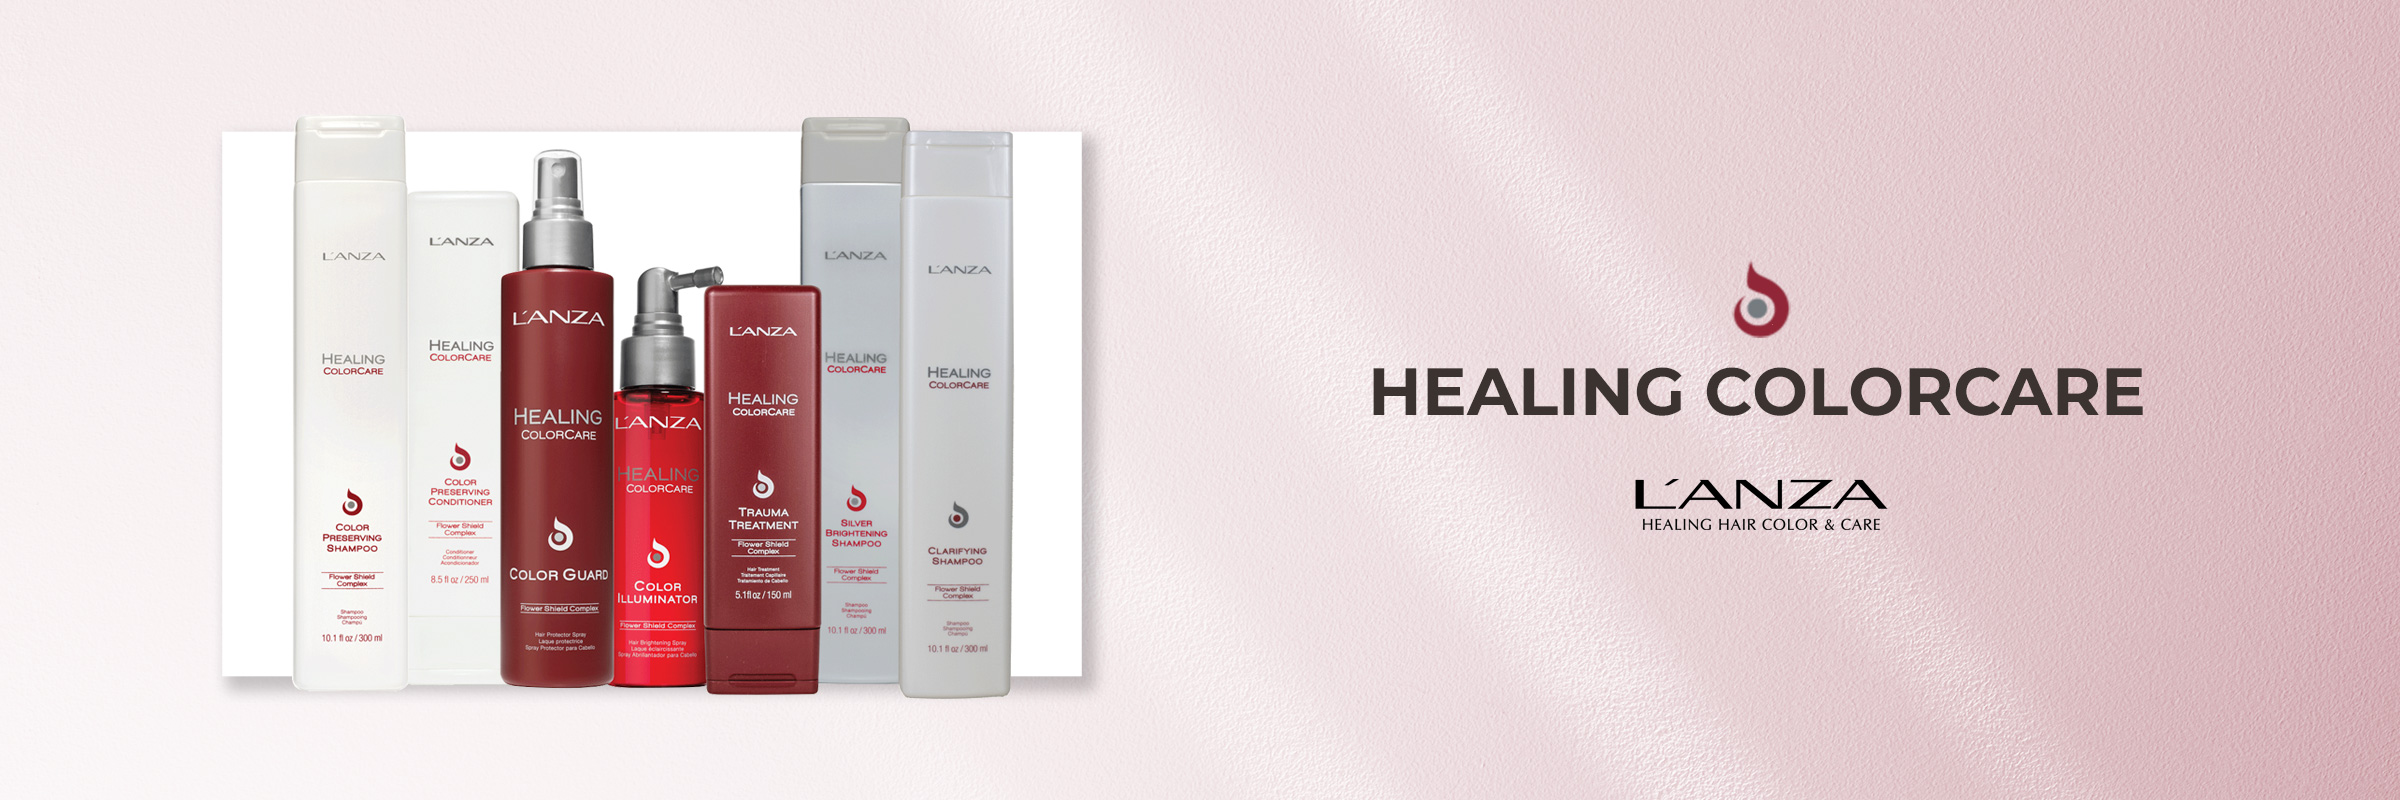 L'Anza Healing Hair Color & Care Healing ColorCare